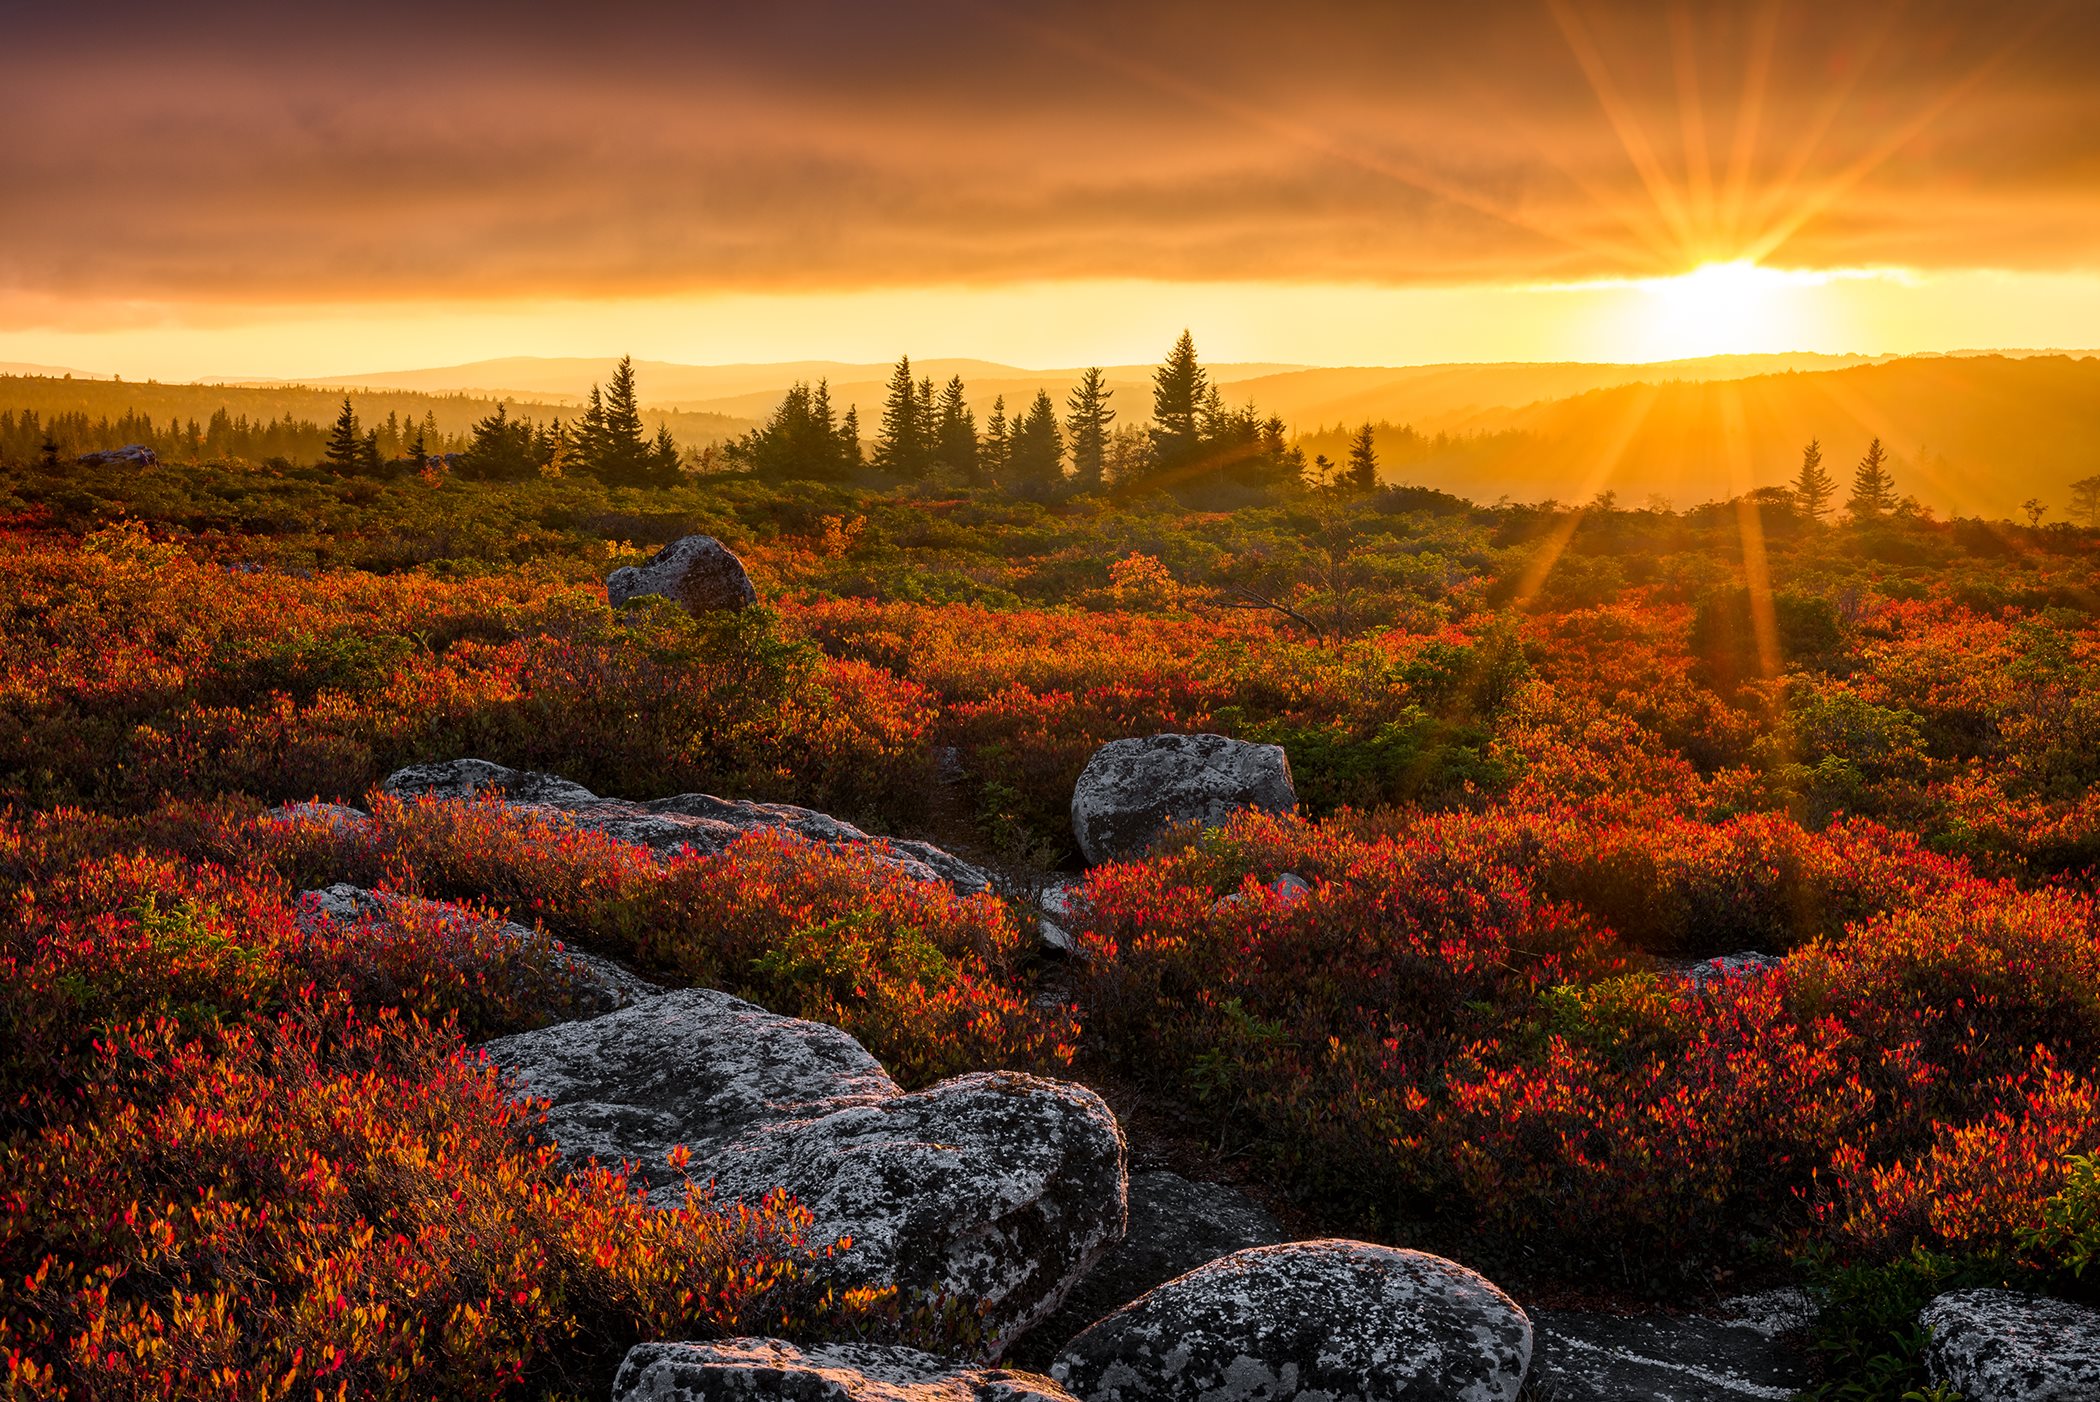 A field of orange flowers and rocks leading to a forest and mountains at sunset